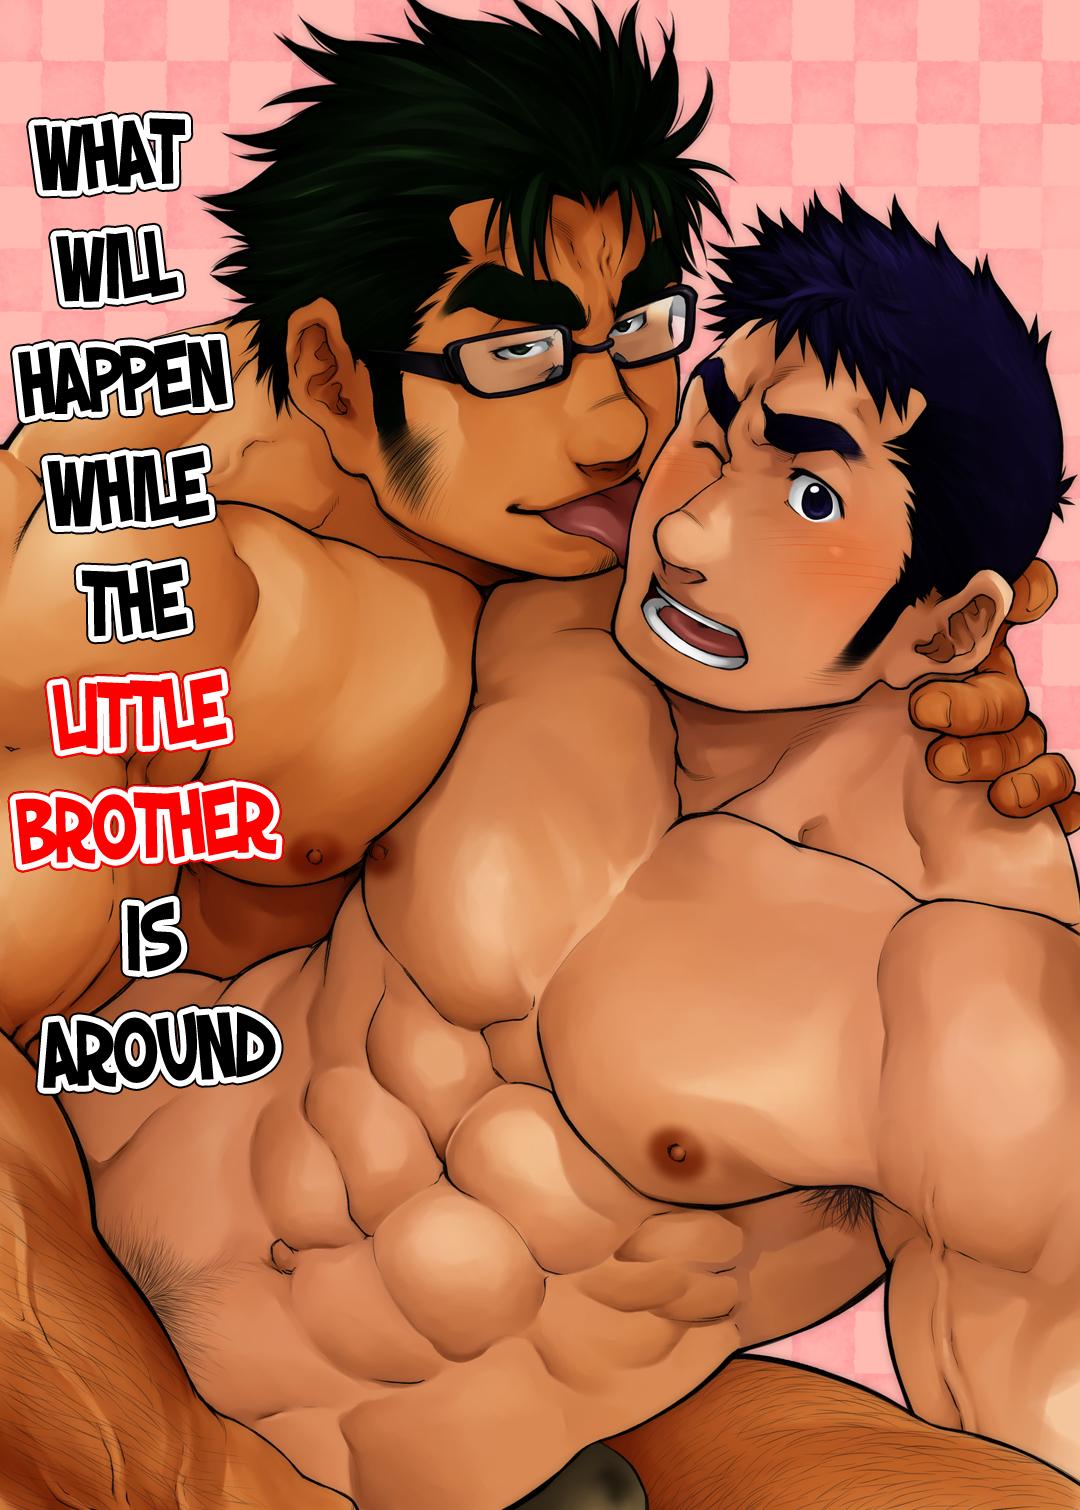 Otouto no Inu Ma ni Nantoyara | What Will Happen While The Little Brother is Around 0